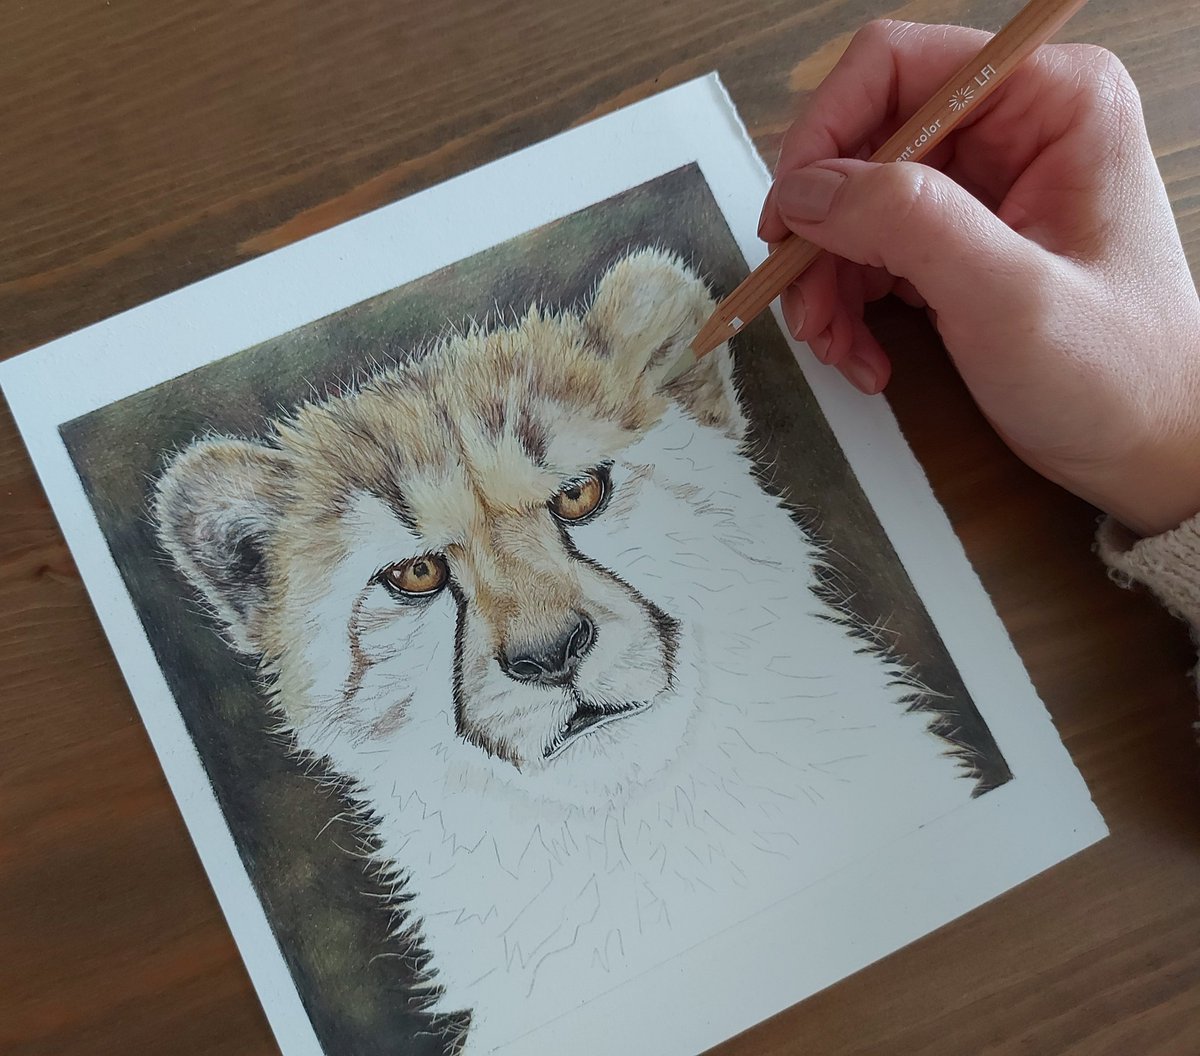 Managed a few more layers today. 

#WorkinProgress #Cheetah #drawing #colouredpencil #art